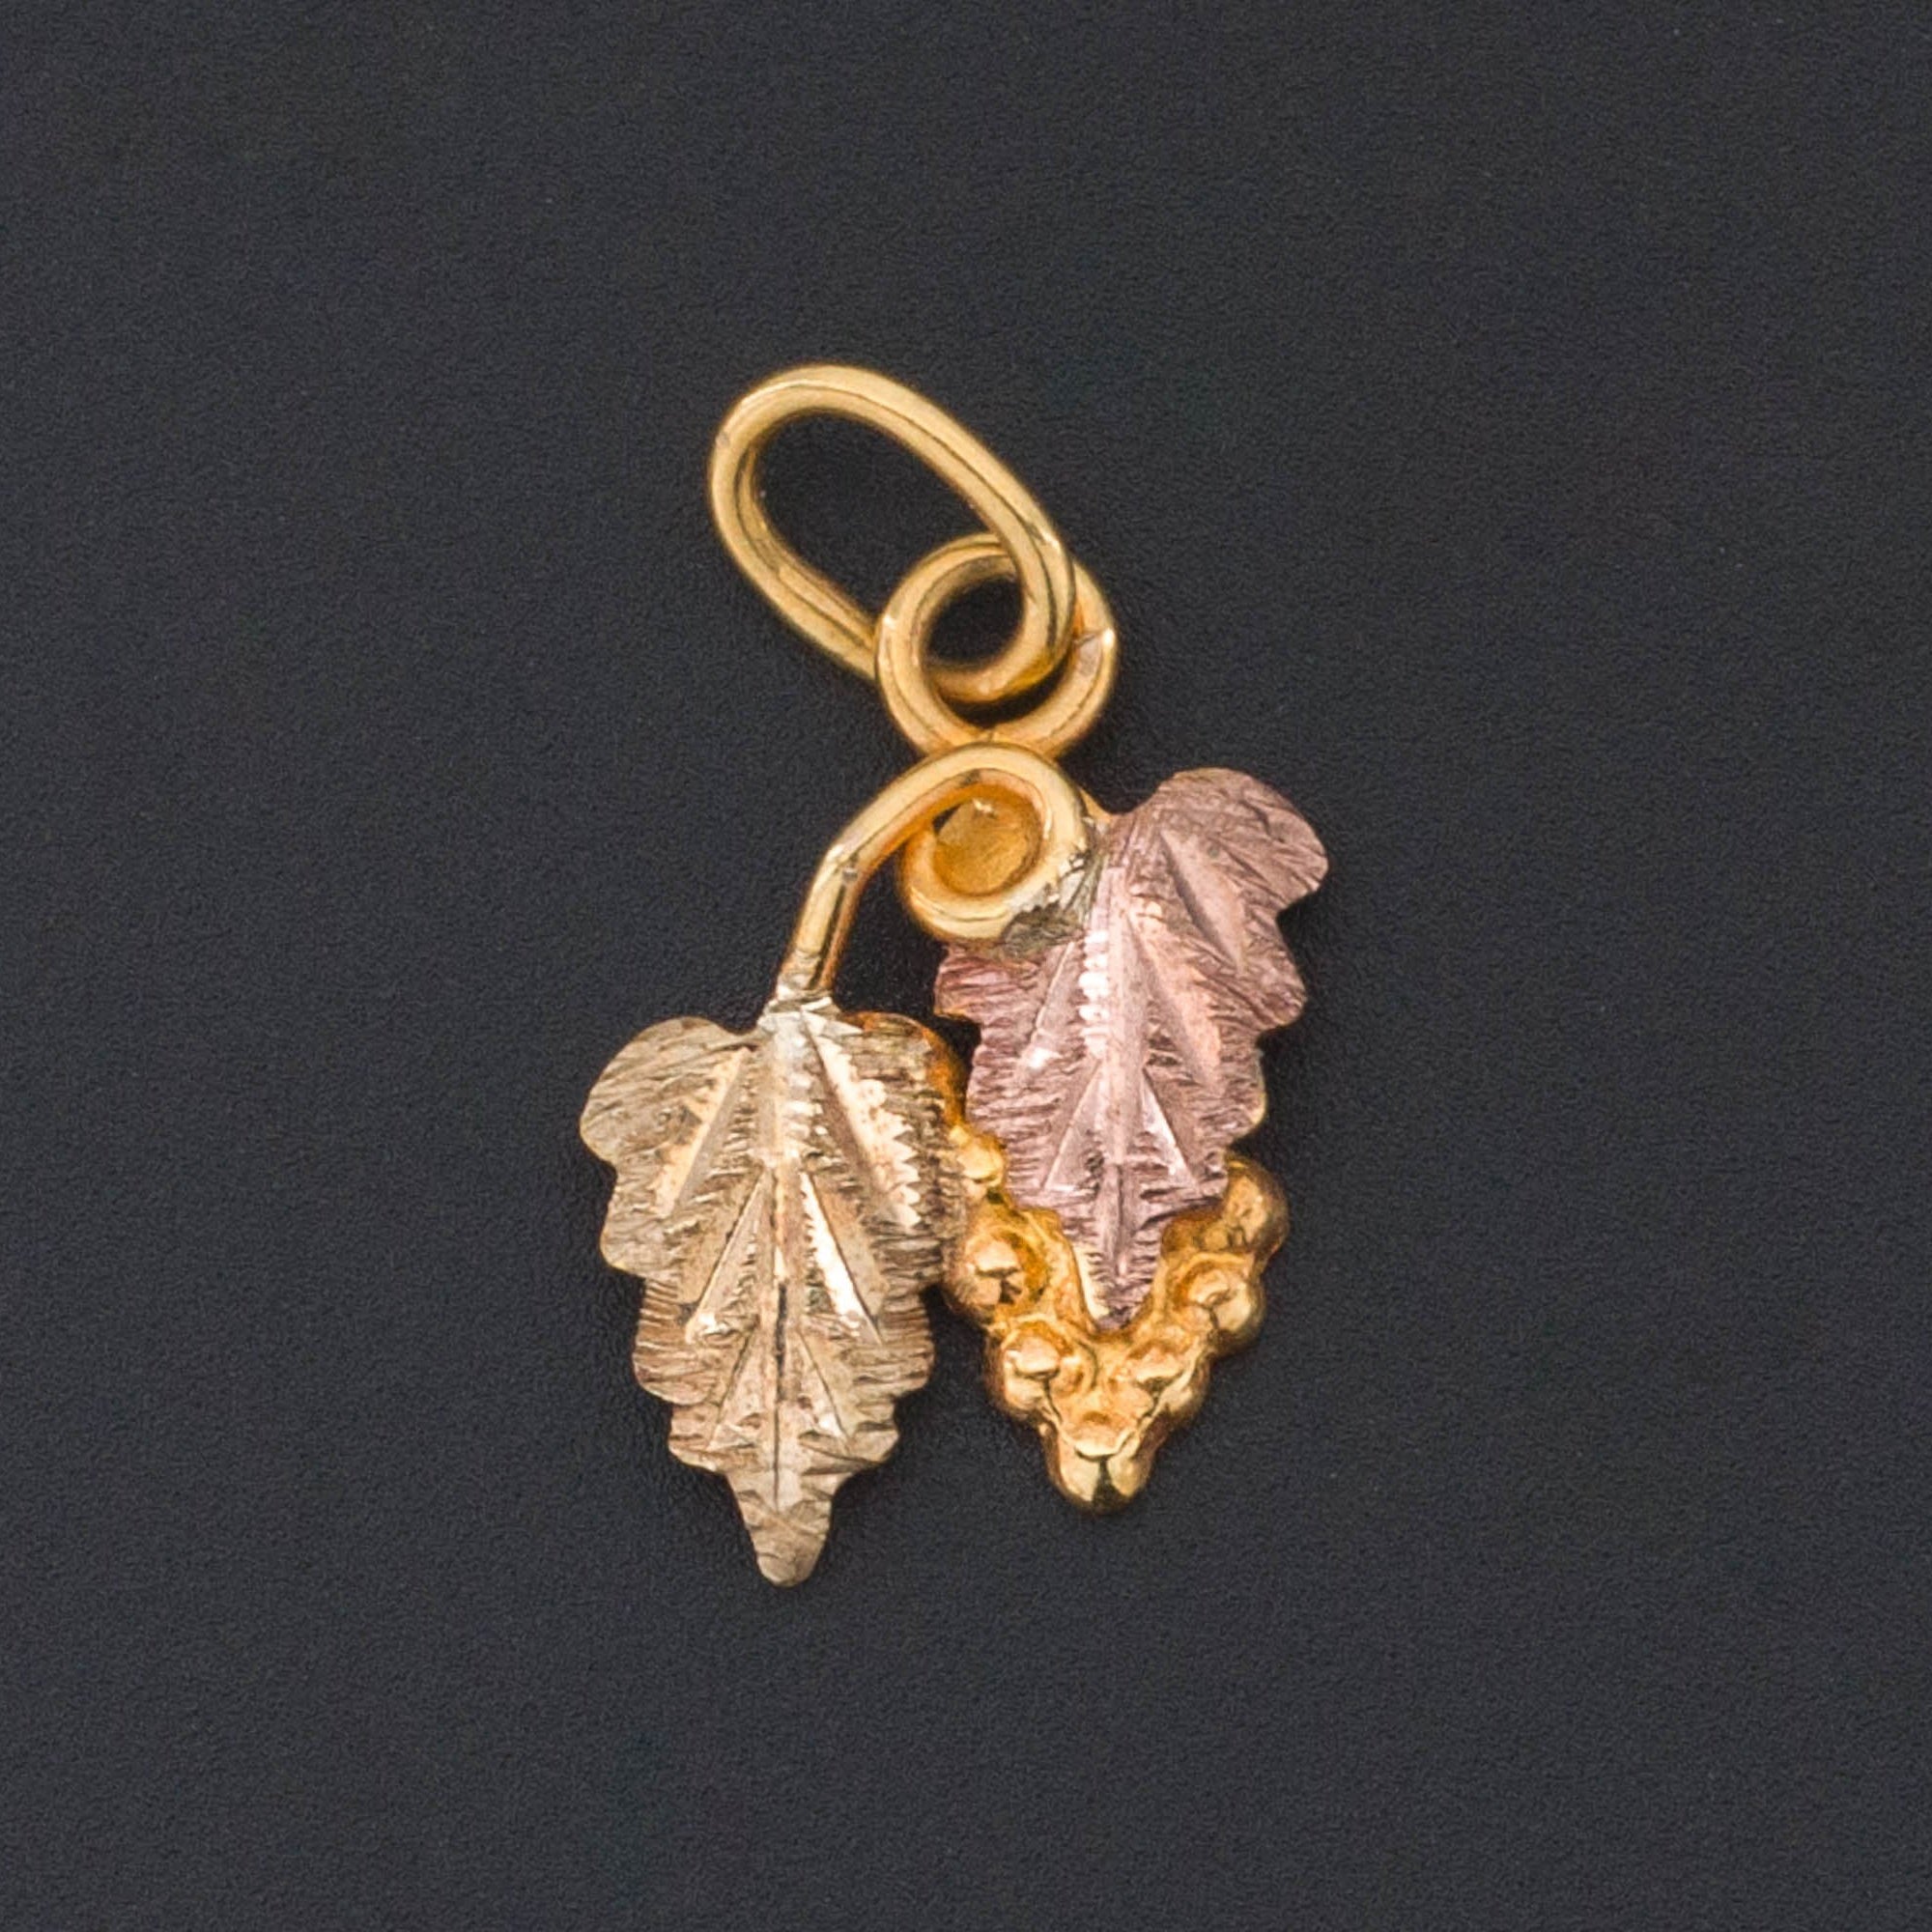 10k Gold Grapes Charm | Vintage Gold Charm-Trademark Antiques